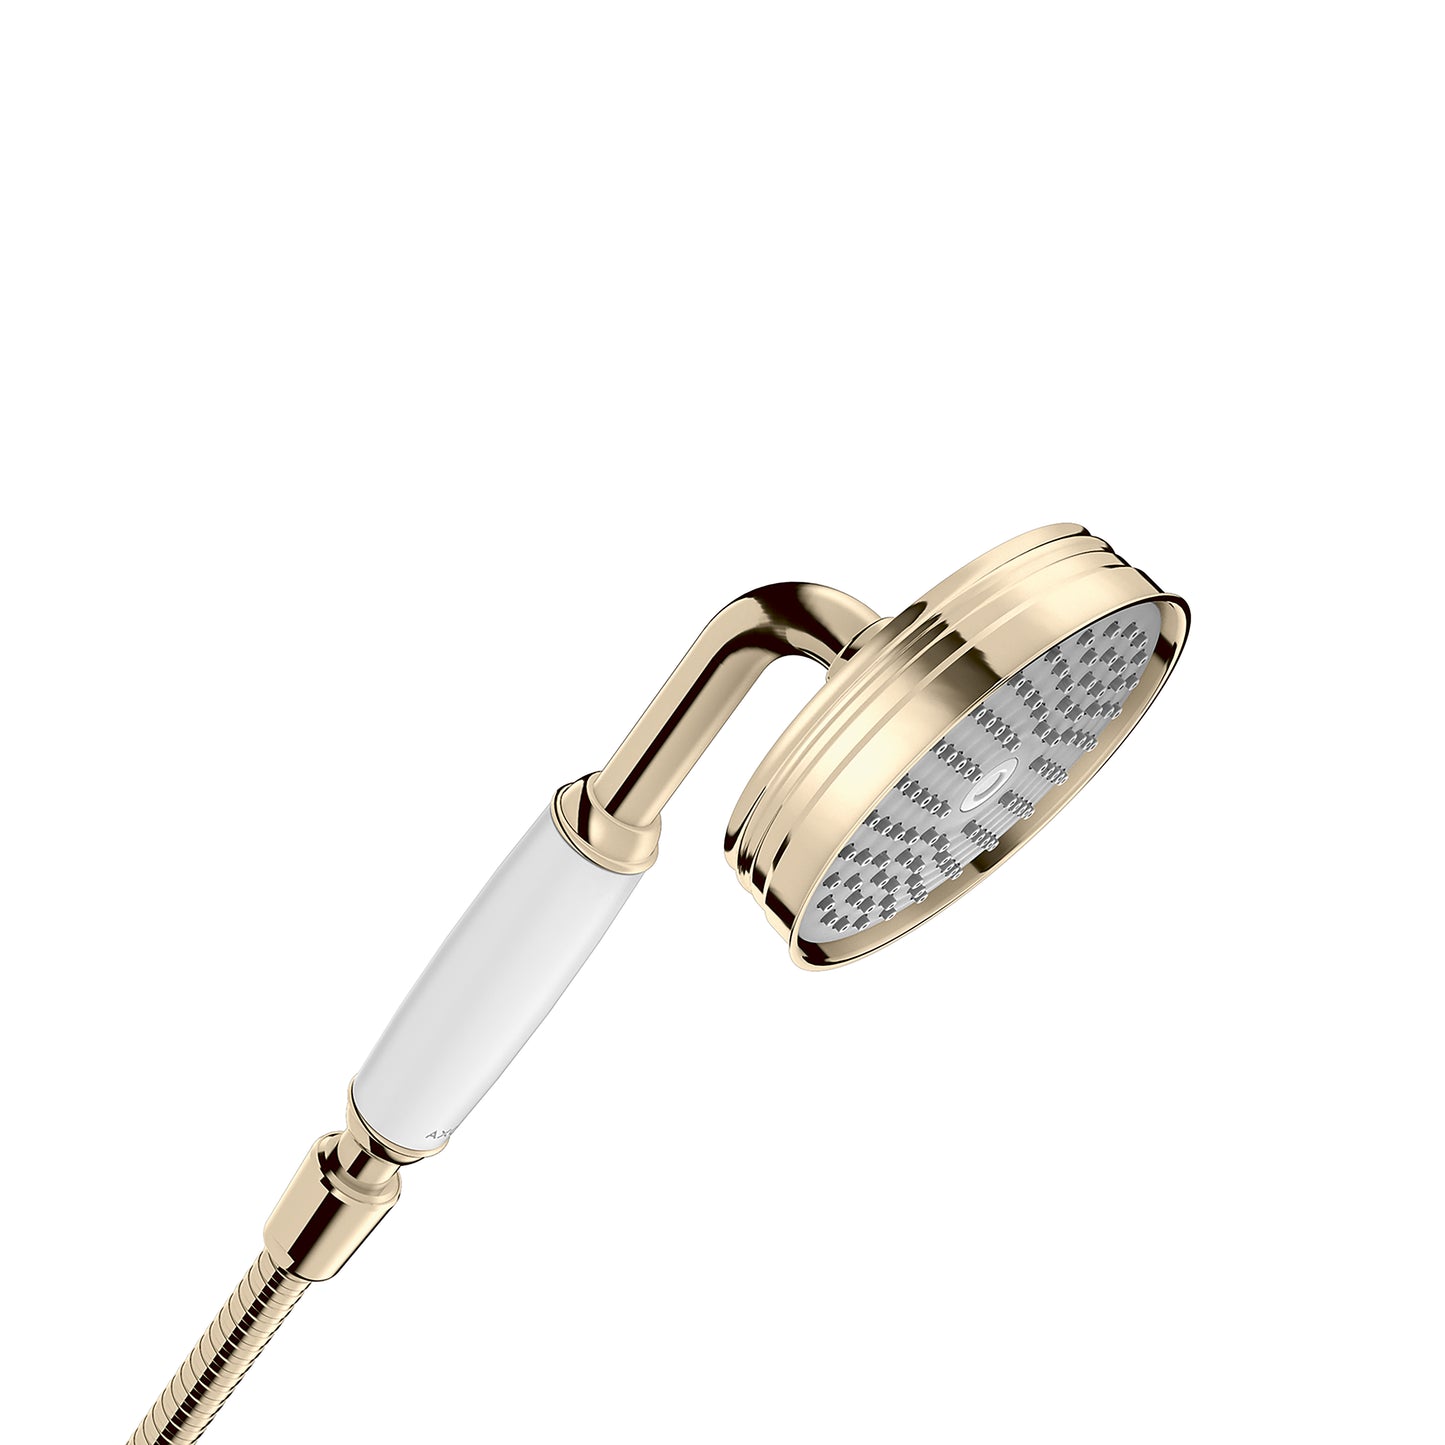 AXOR 16320831 Polished Nickel Montreux Classic Handshower 2.5 GPM